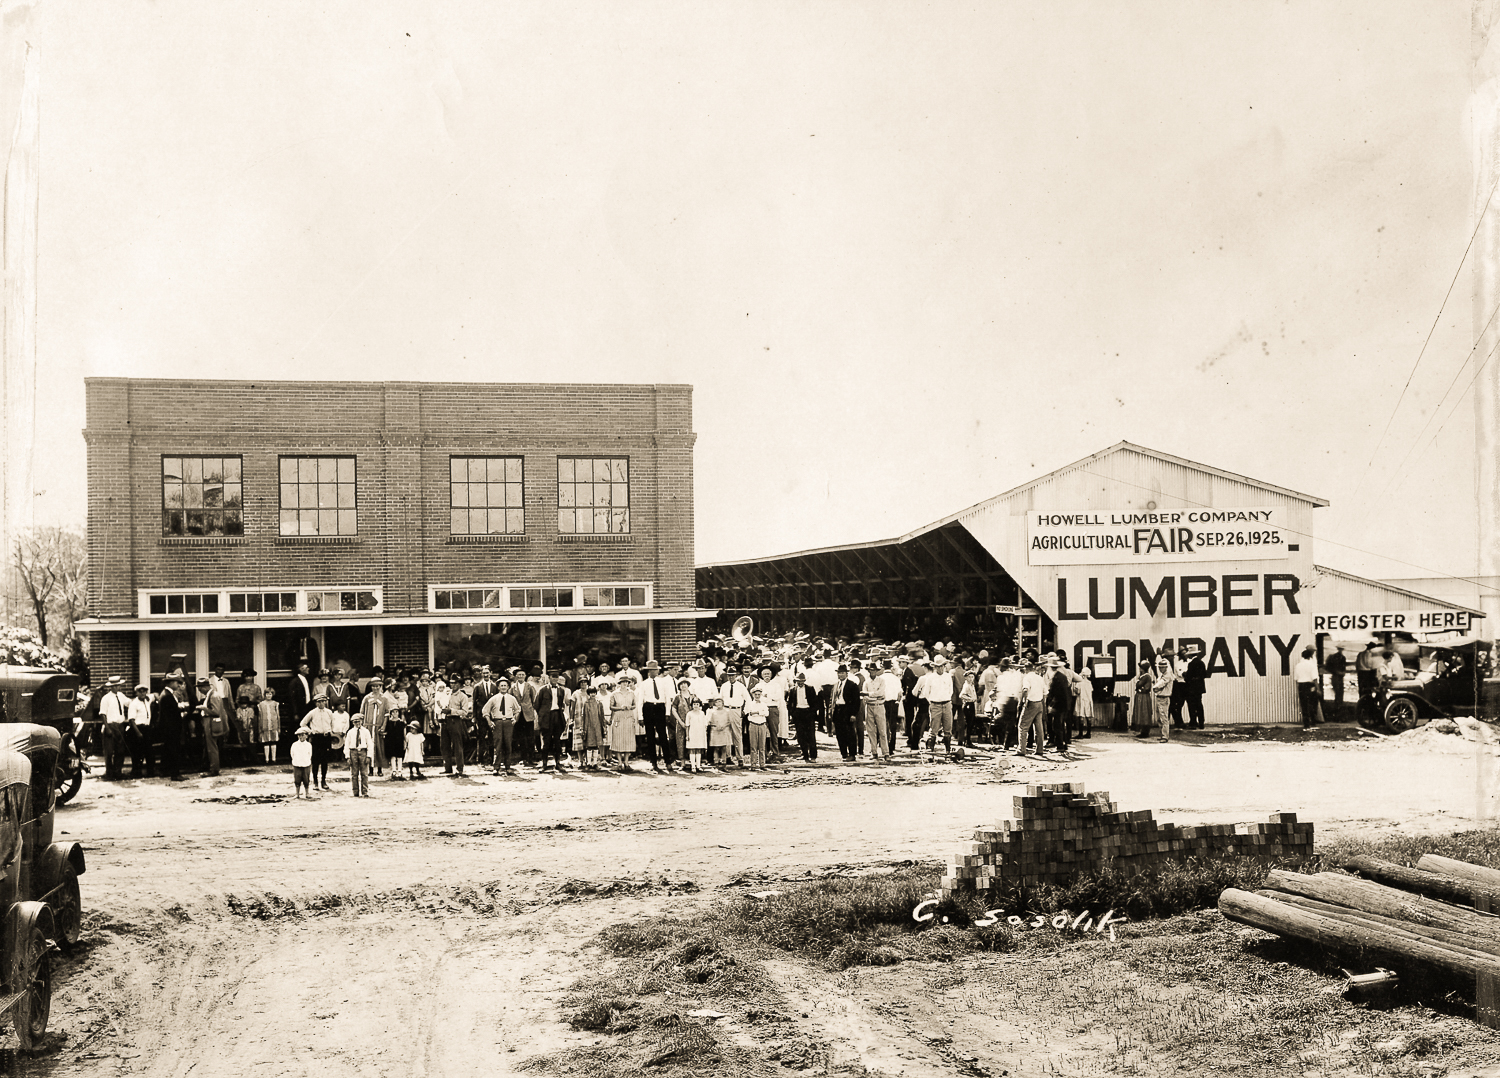 Howell Lumber Co. Agricultural Fair in 1925